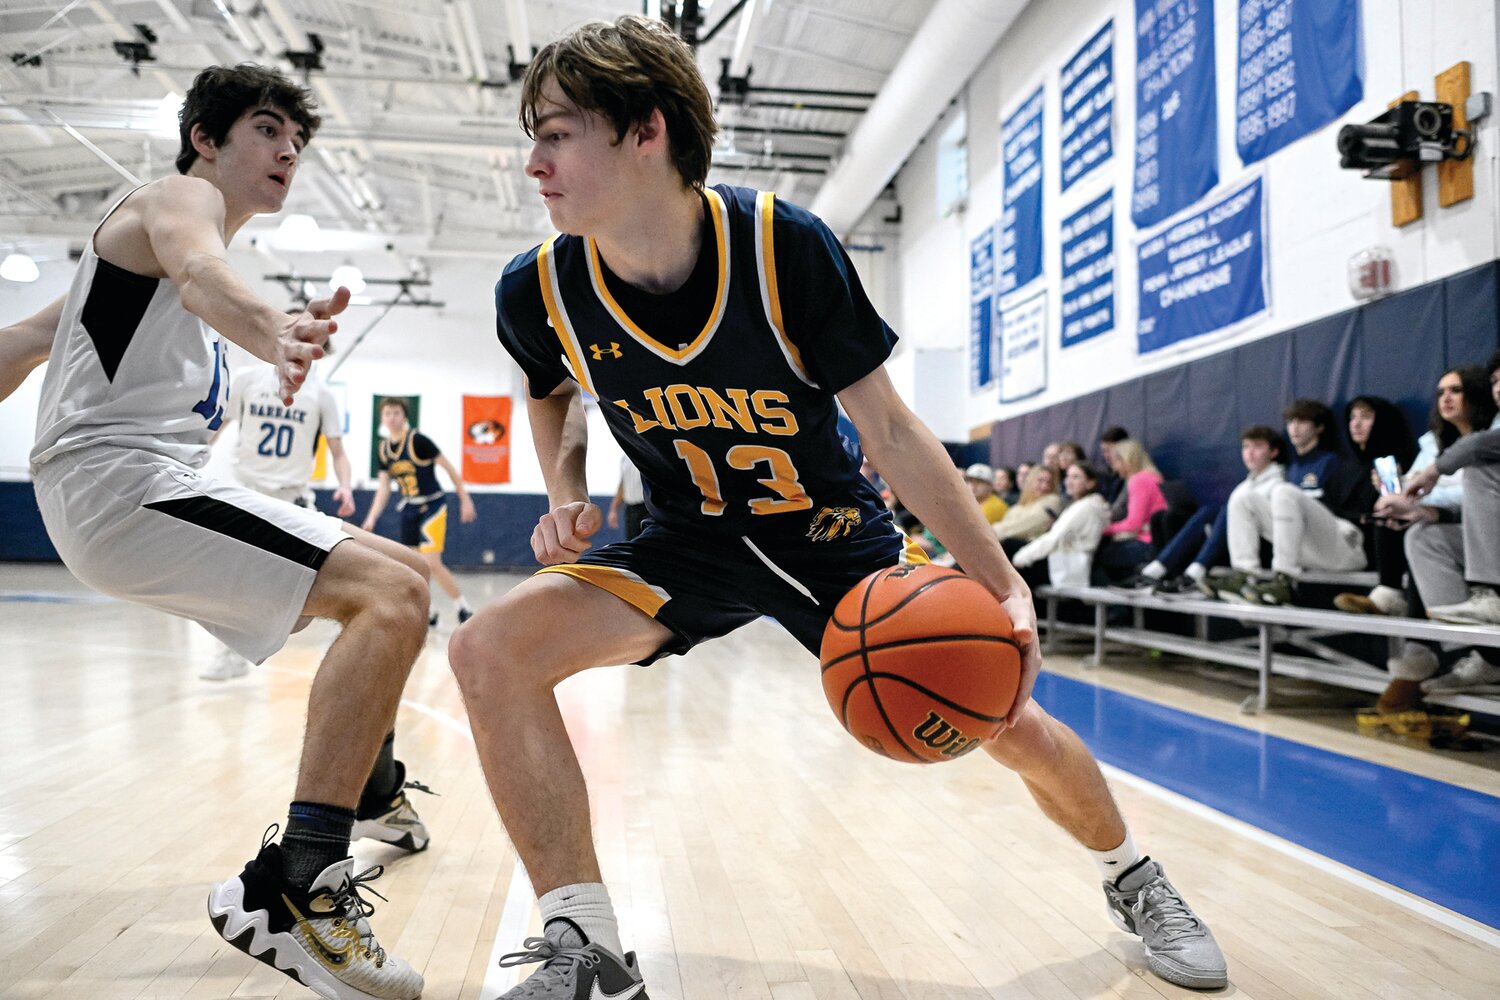 New Hope-Solebury’s Rocco Massimino drives around the defense of Jack M Barrack Hebrew Academy’s Jonah Pappas.